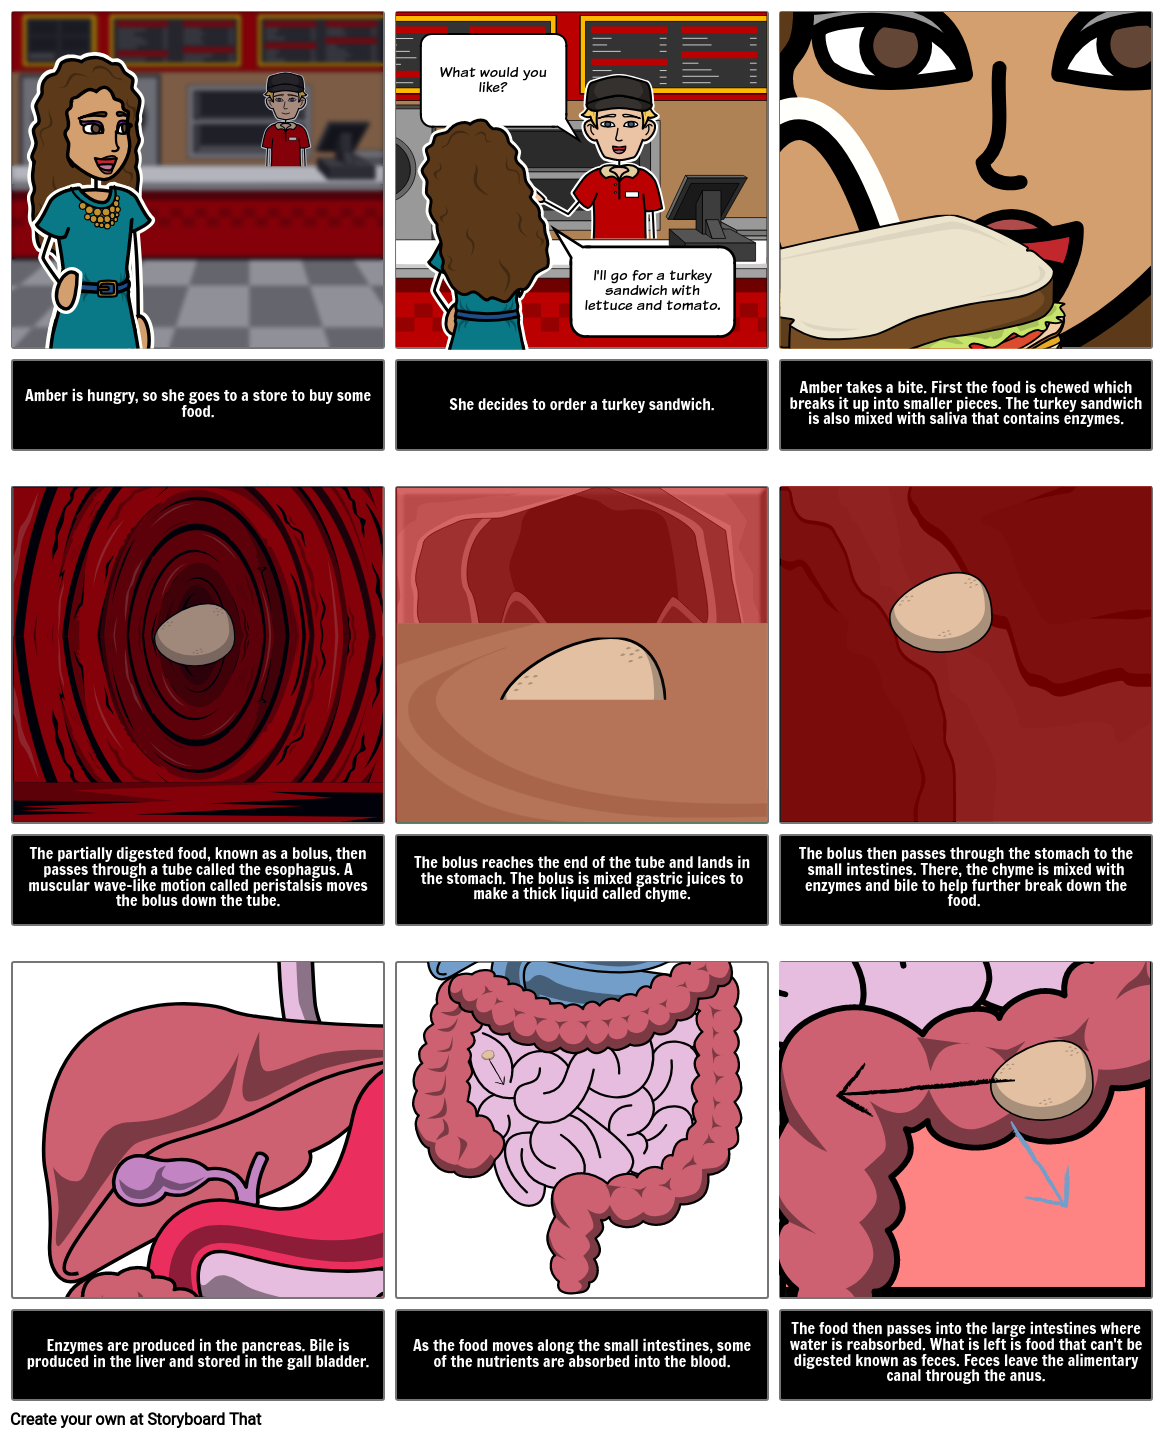 Digestion Narrative: How is Food Digested?